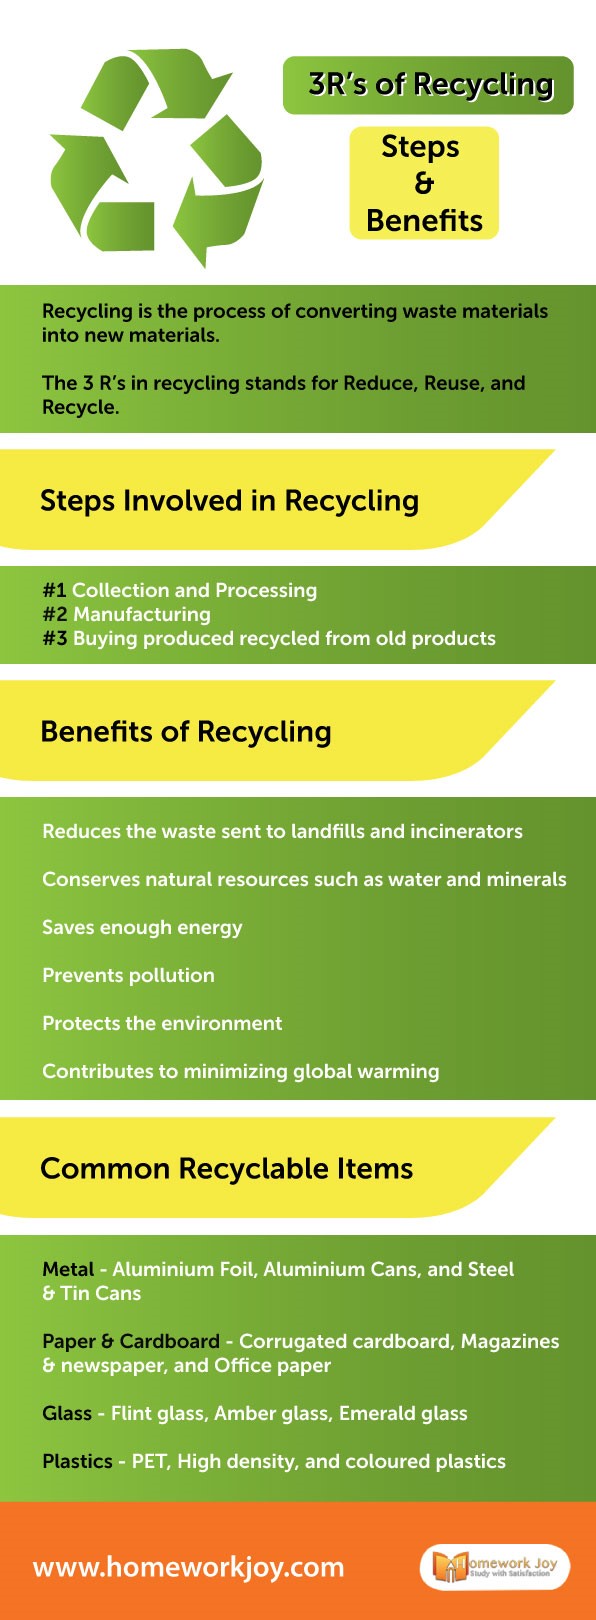 3Rs of Recycling